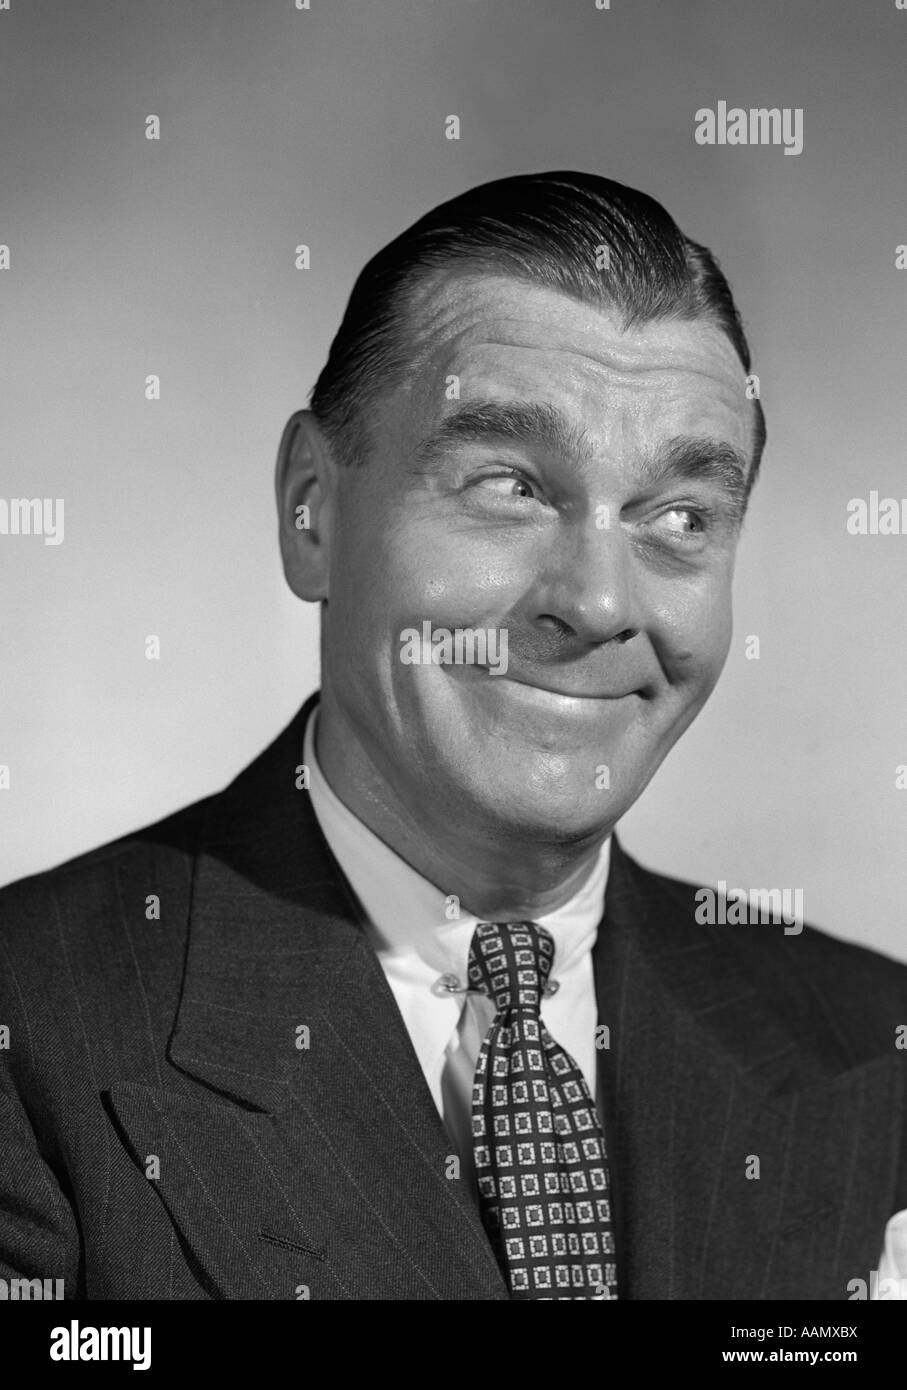 1950s MAN SMILING BUSINESSMAN WITH FUNNY AMUSED FACIAL EXPRESSION LOOKING OFF TO SIDE AWAY Stock Photo